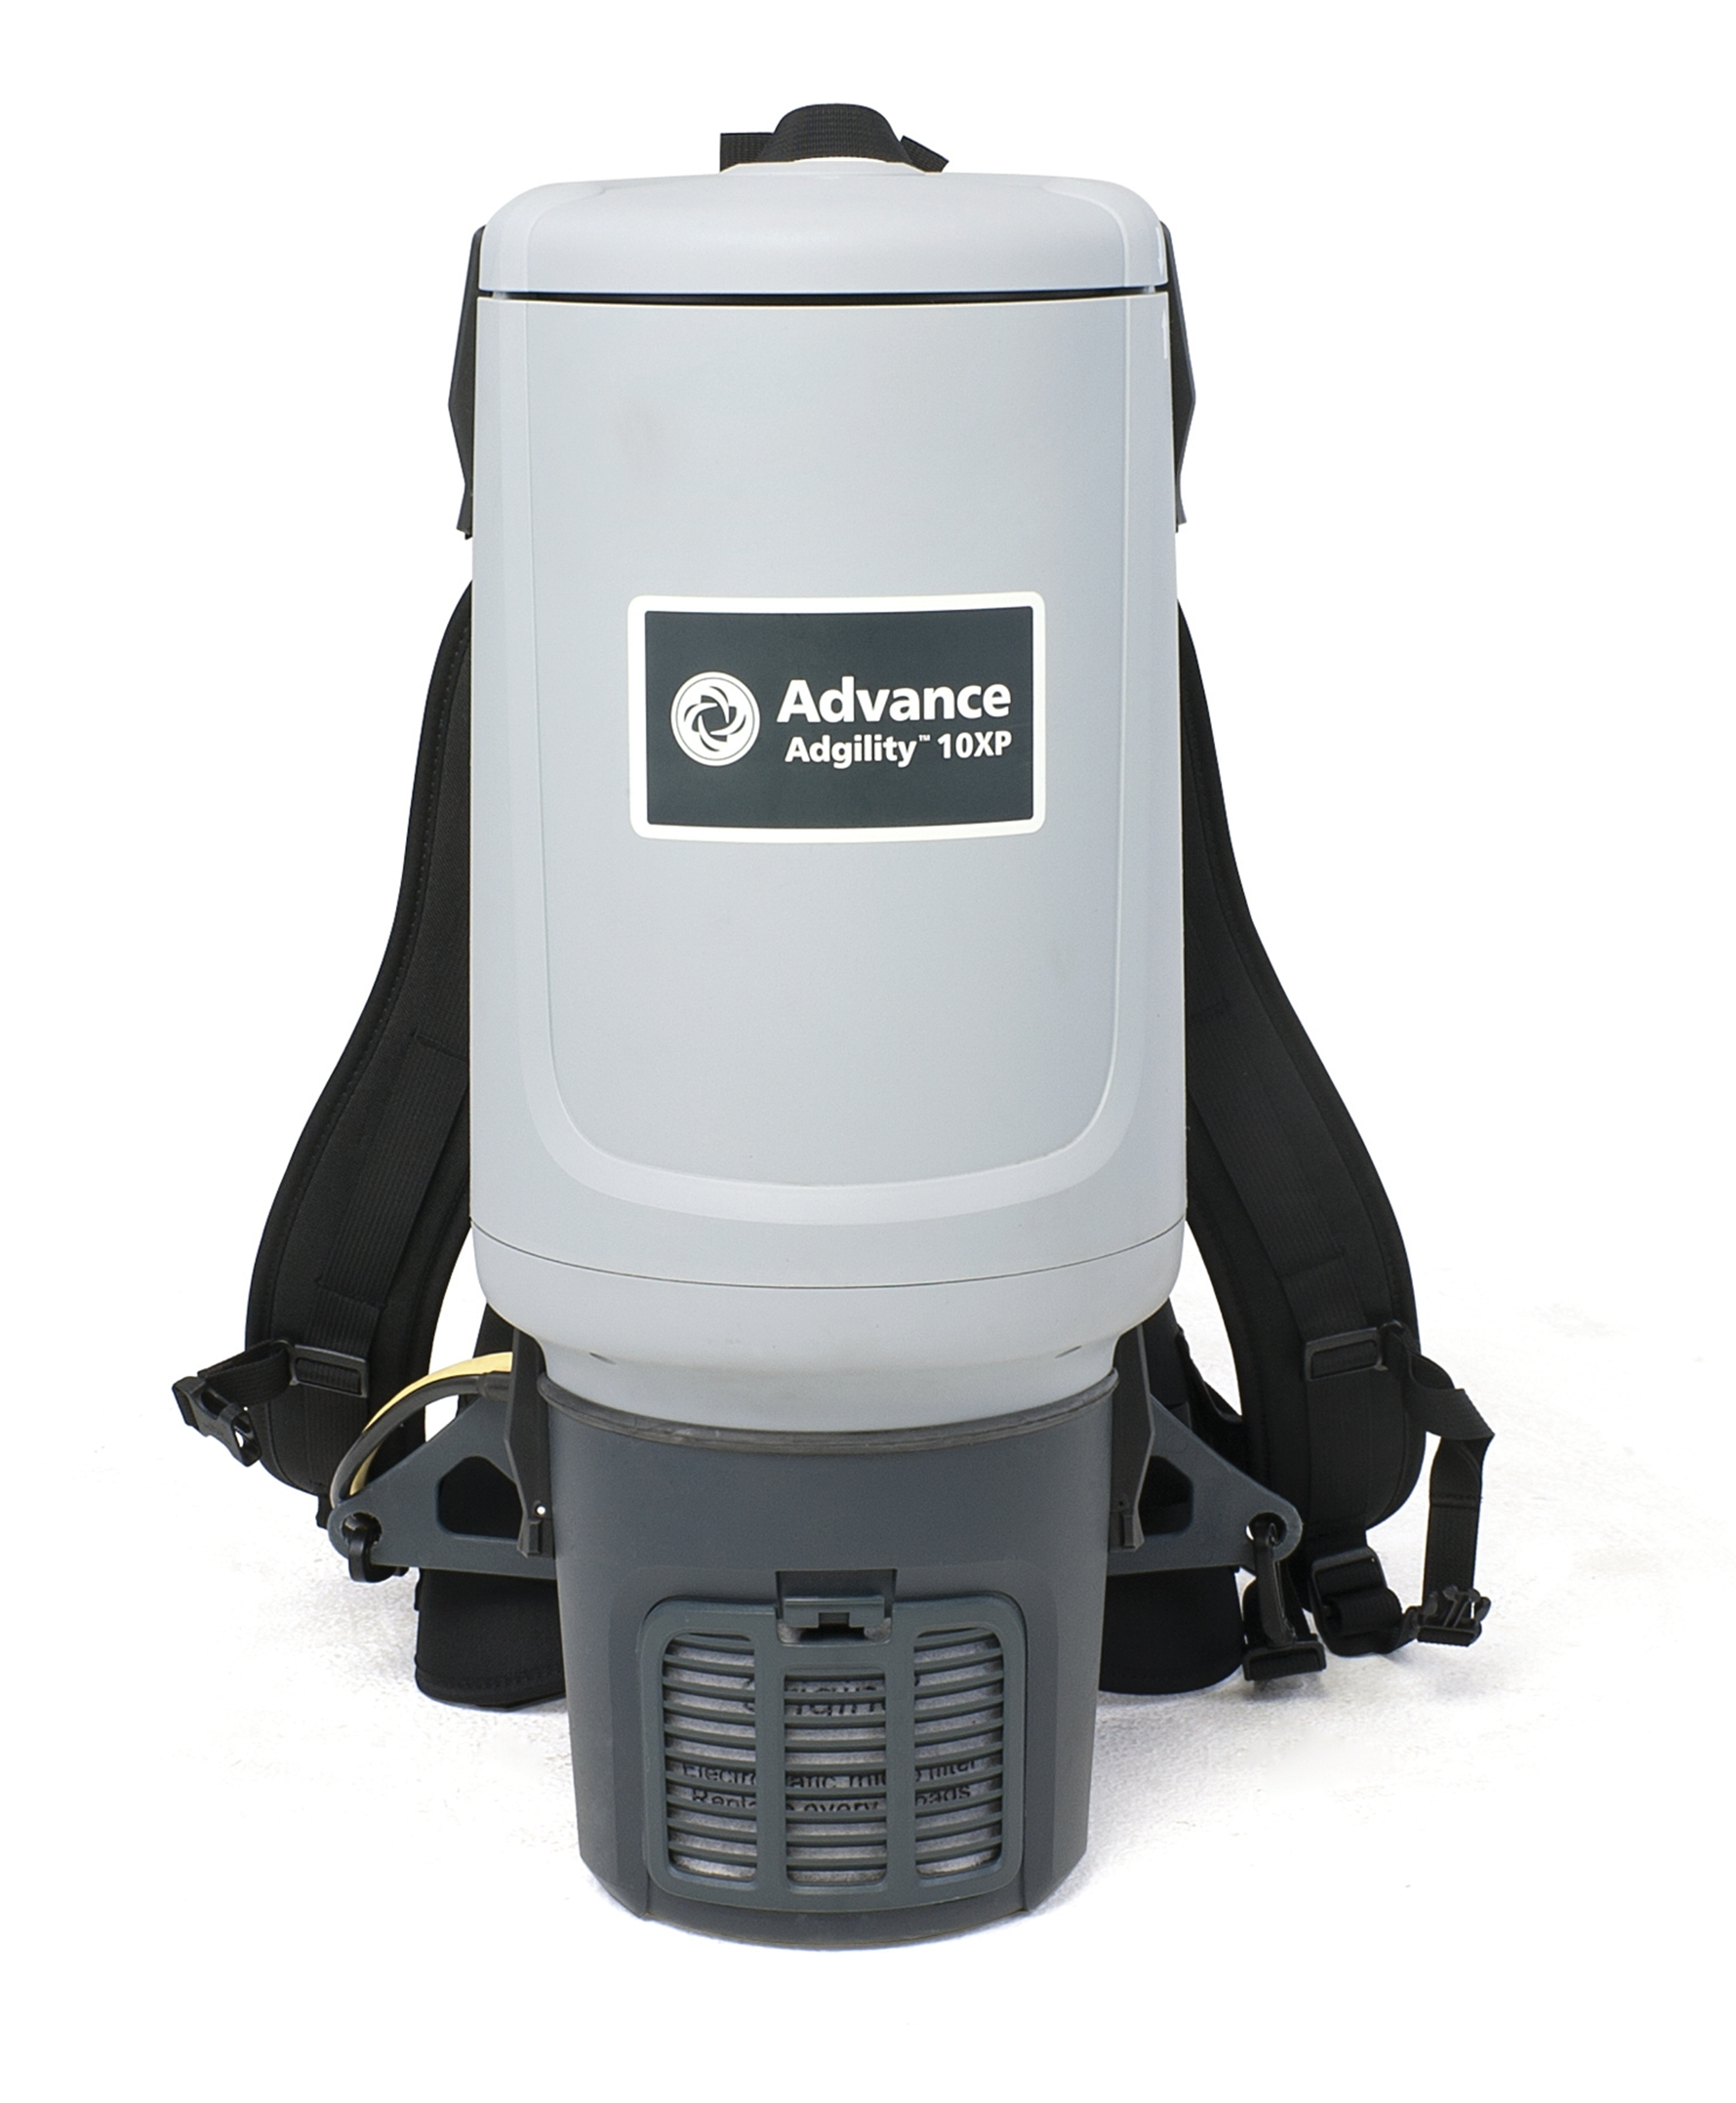 Advance Adgility 10 XP Backpack vacuum Advance, Adgility, 10, XP, Backpack, vacuum, karcher, BV, 7/1, HEPA, quiet, lightweight, windsor, commercial, harness, janitorial, professional, industrial, 